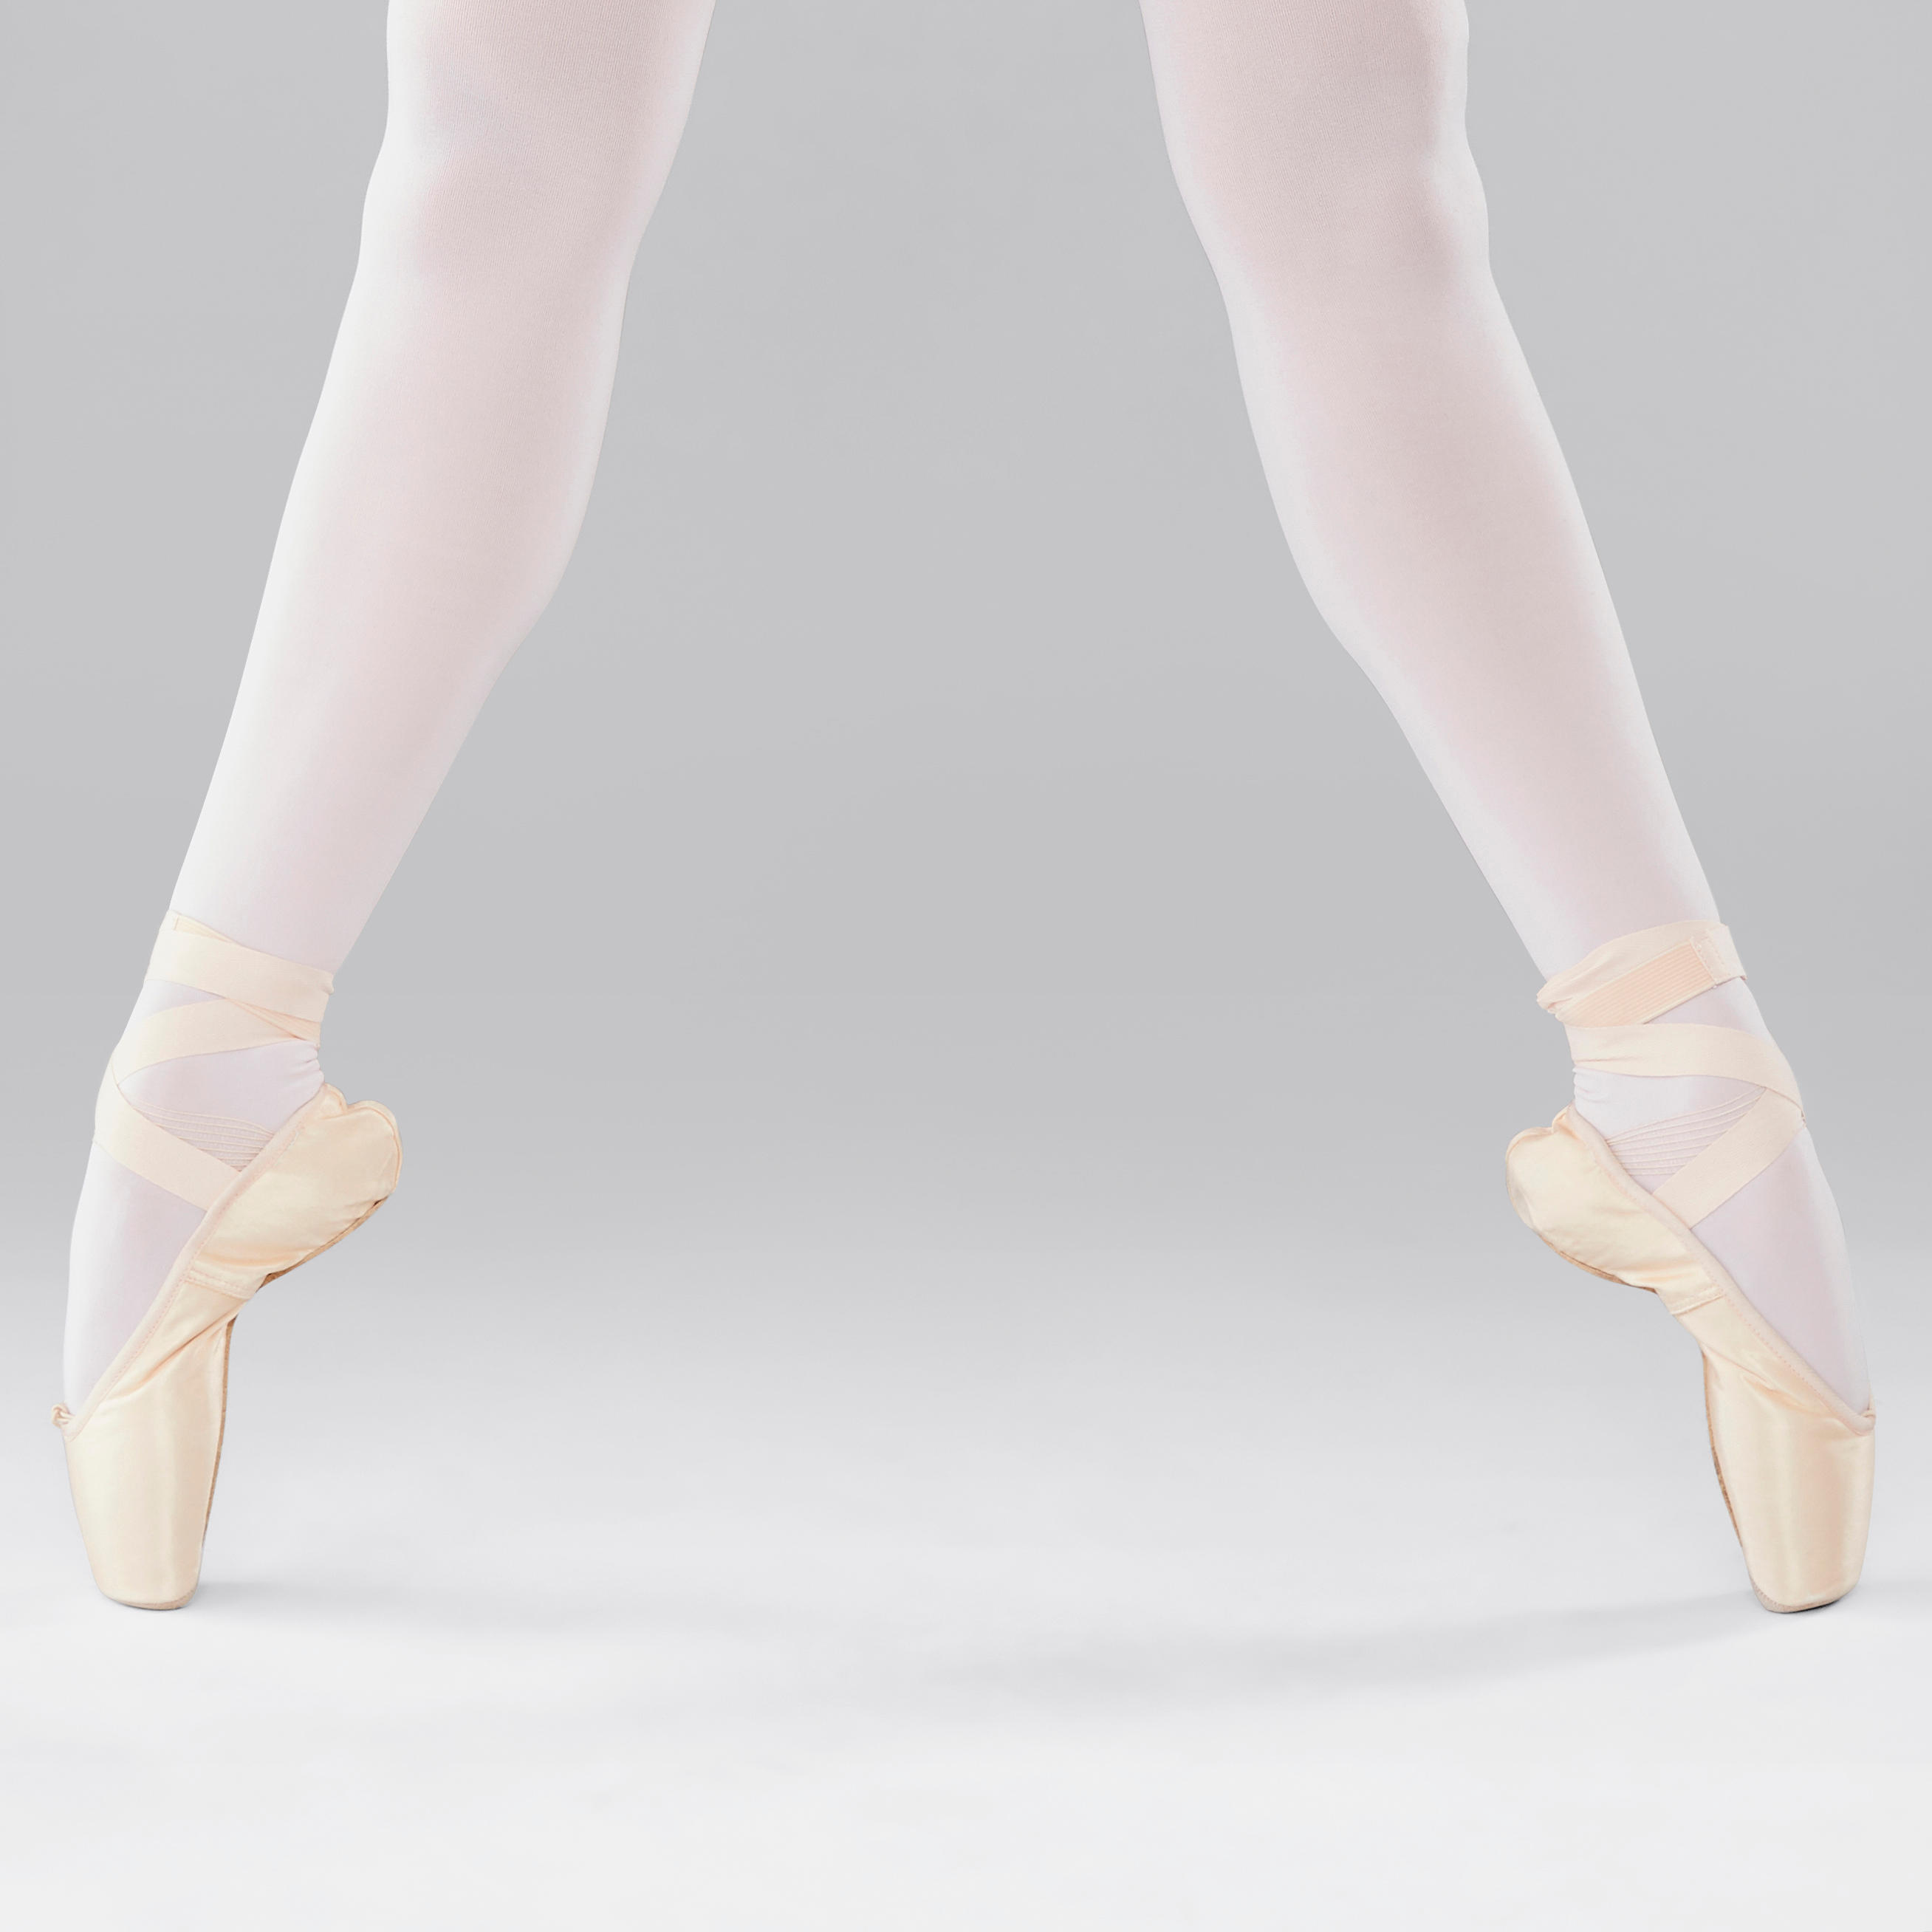 Beginner Pointe Shoes with Flexible Soles - Sizes 1 to 8 3/6